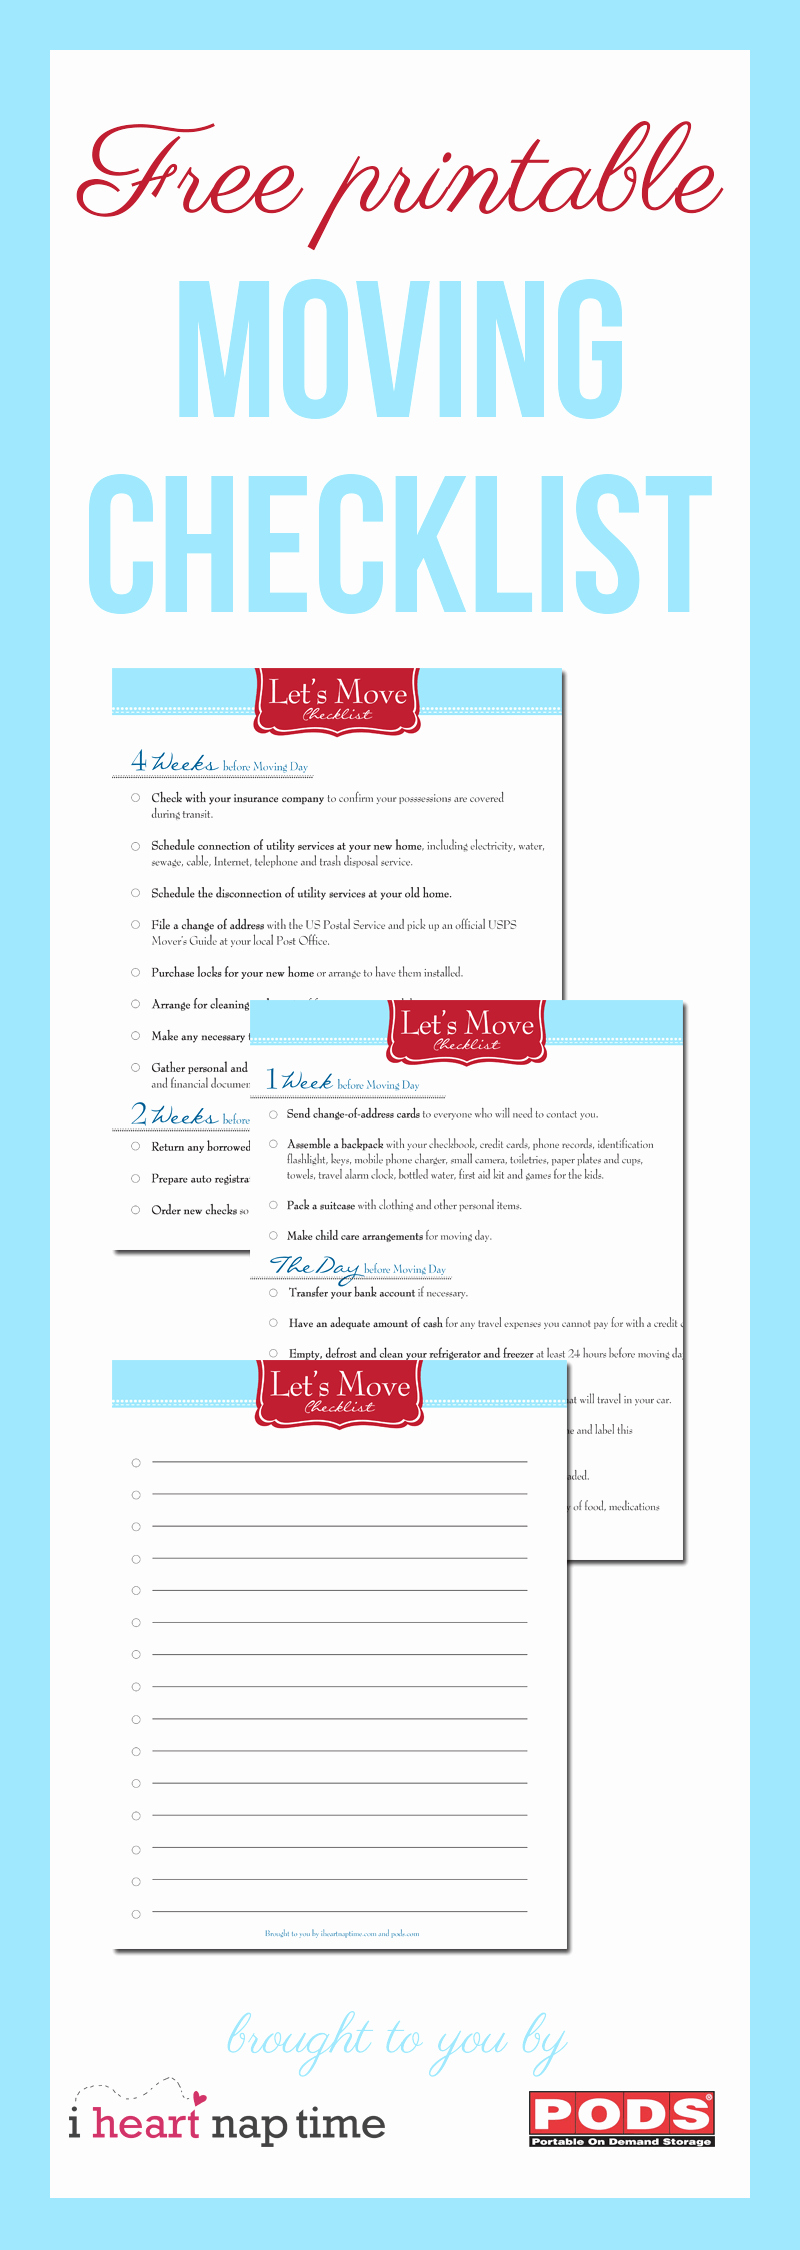 Moving Checklist Printable Template Beautiful Free Printable Moving Checklist I Heart Nap Time